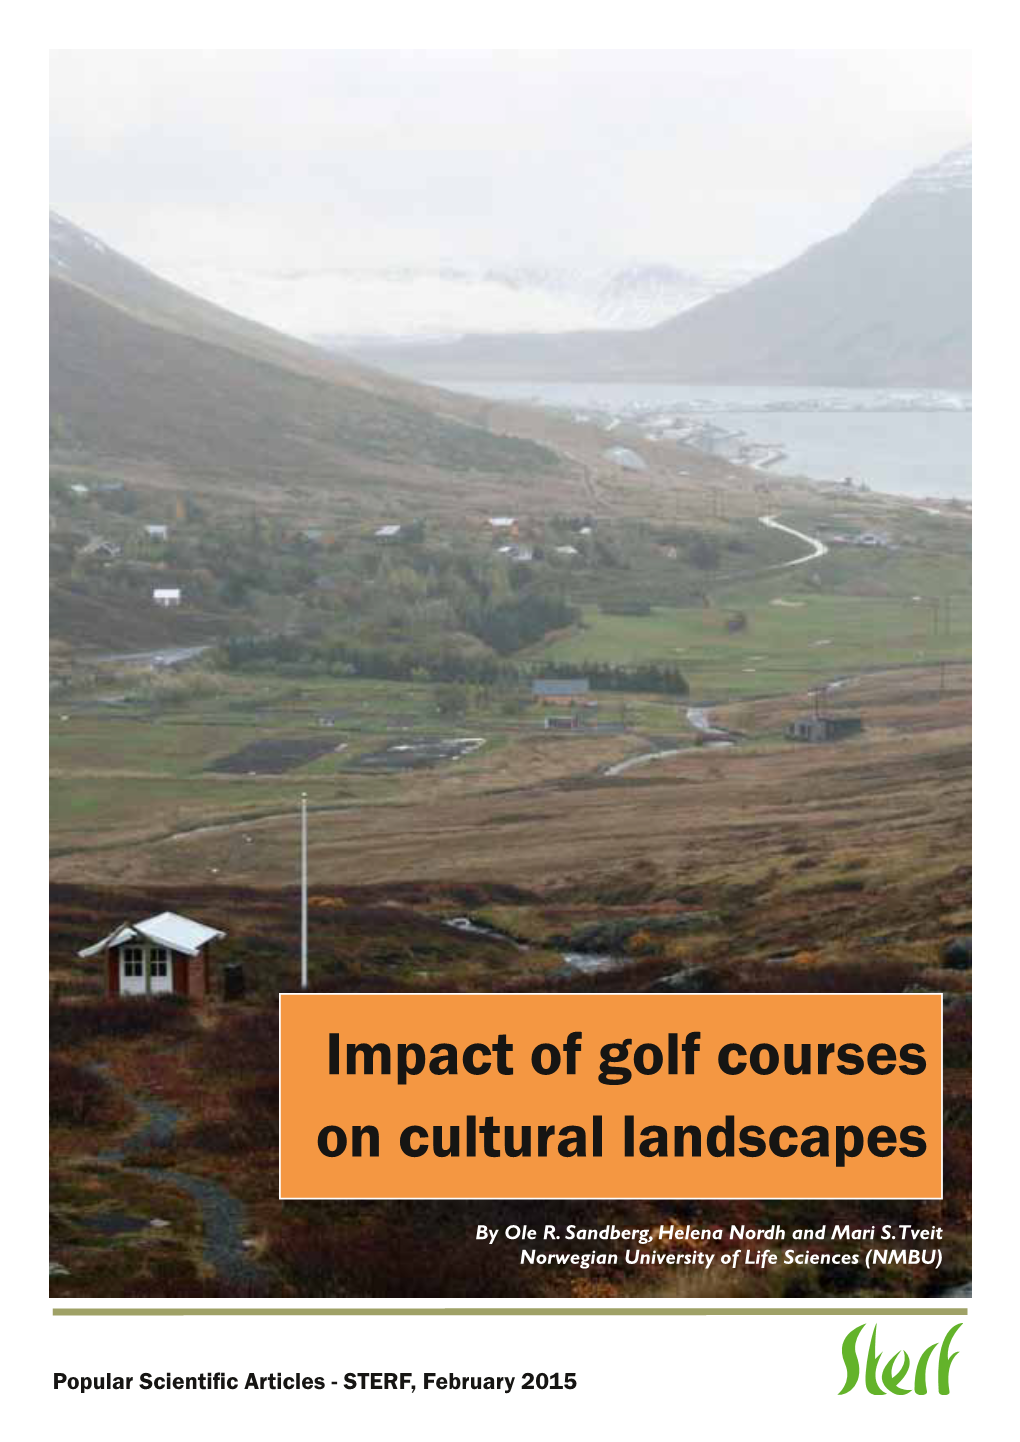 Impact of Golf Courses on Cultural Landscapes